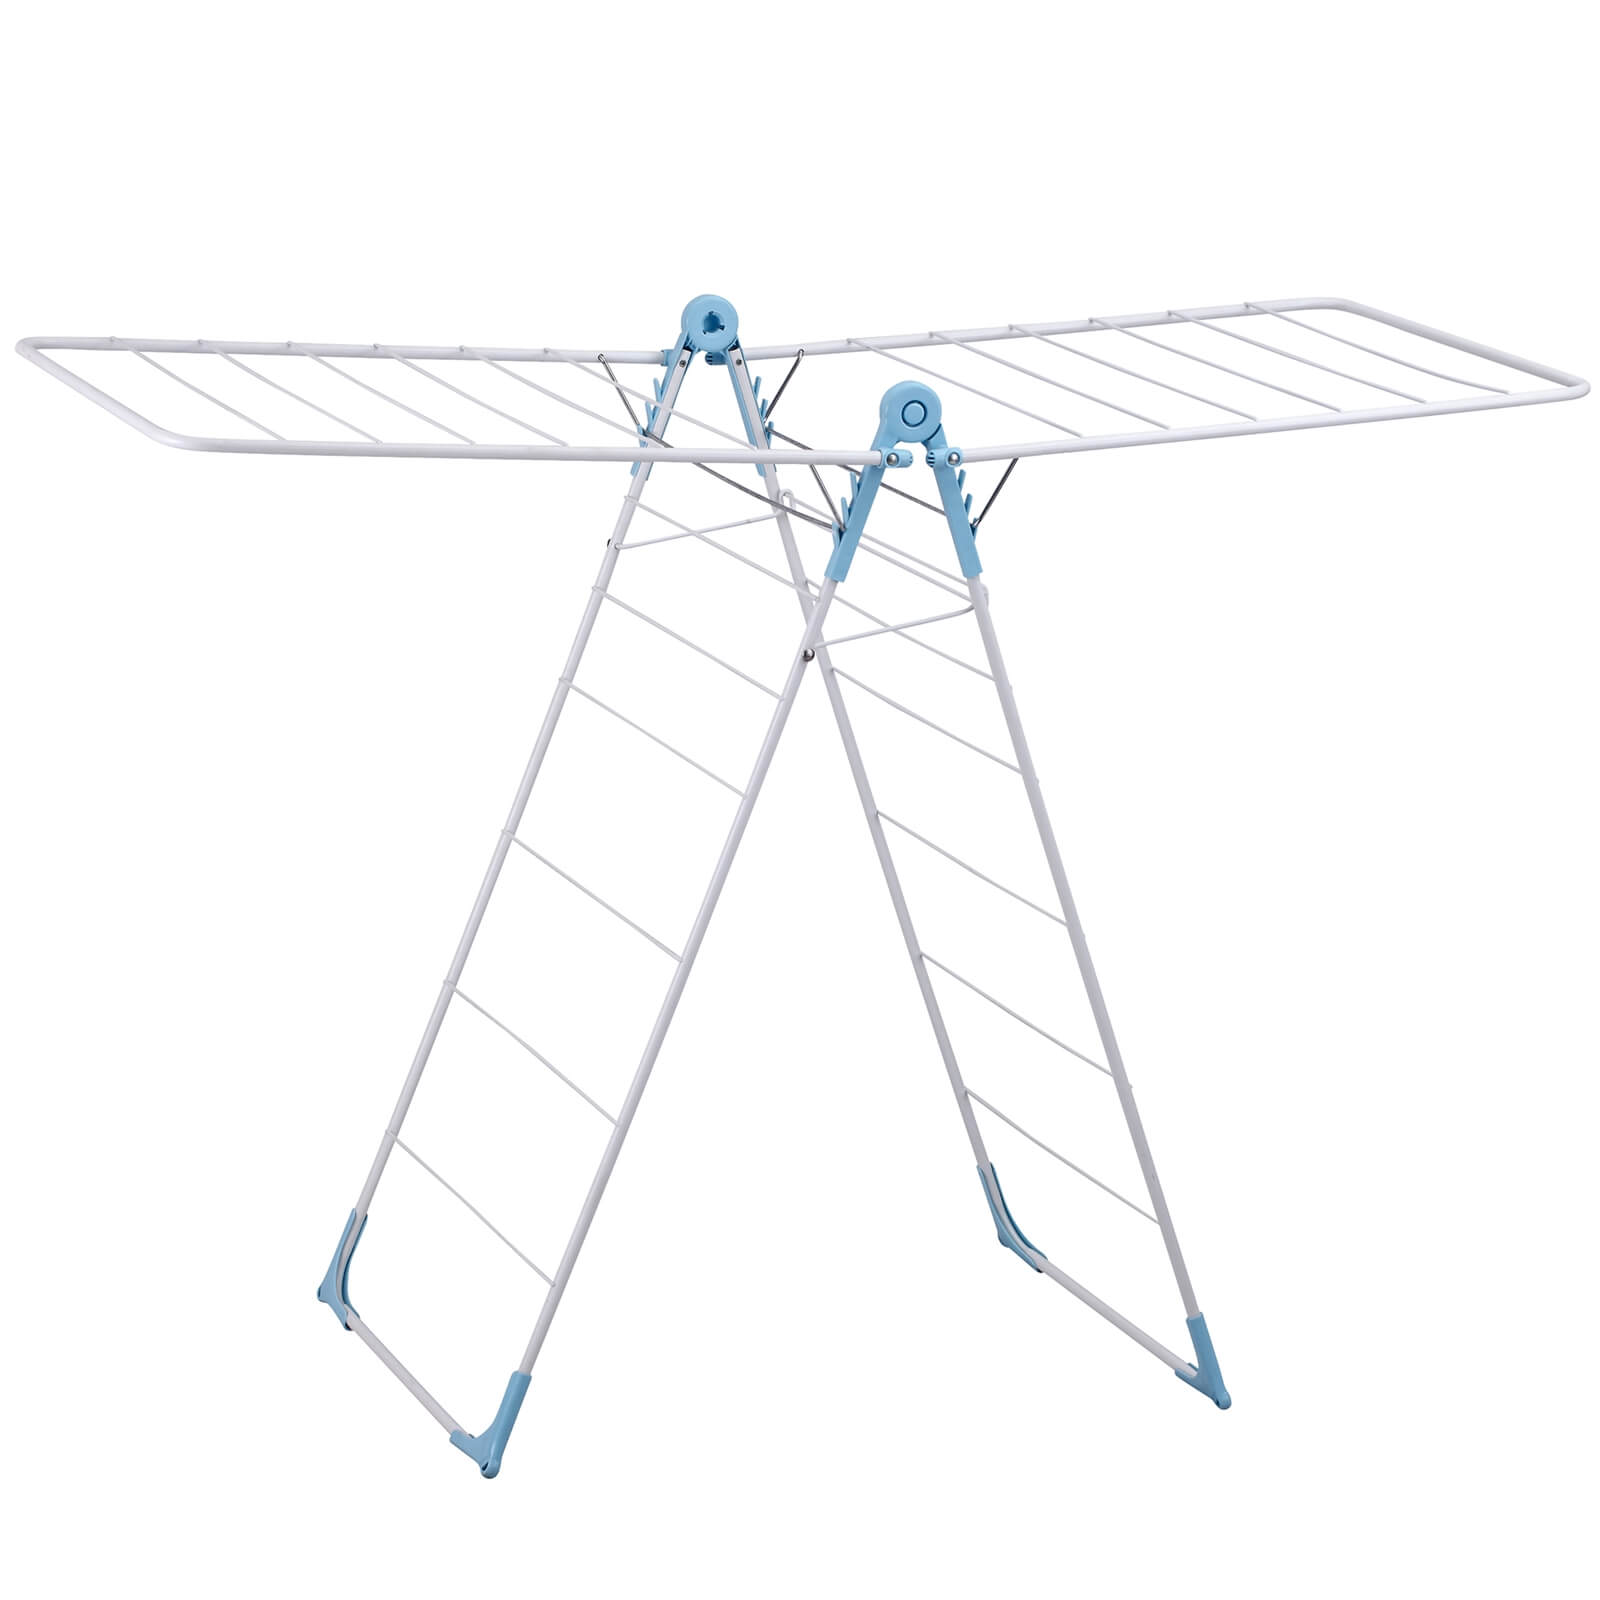 16m X-Wing Airer